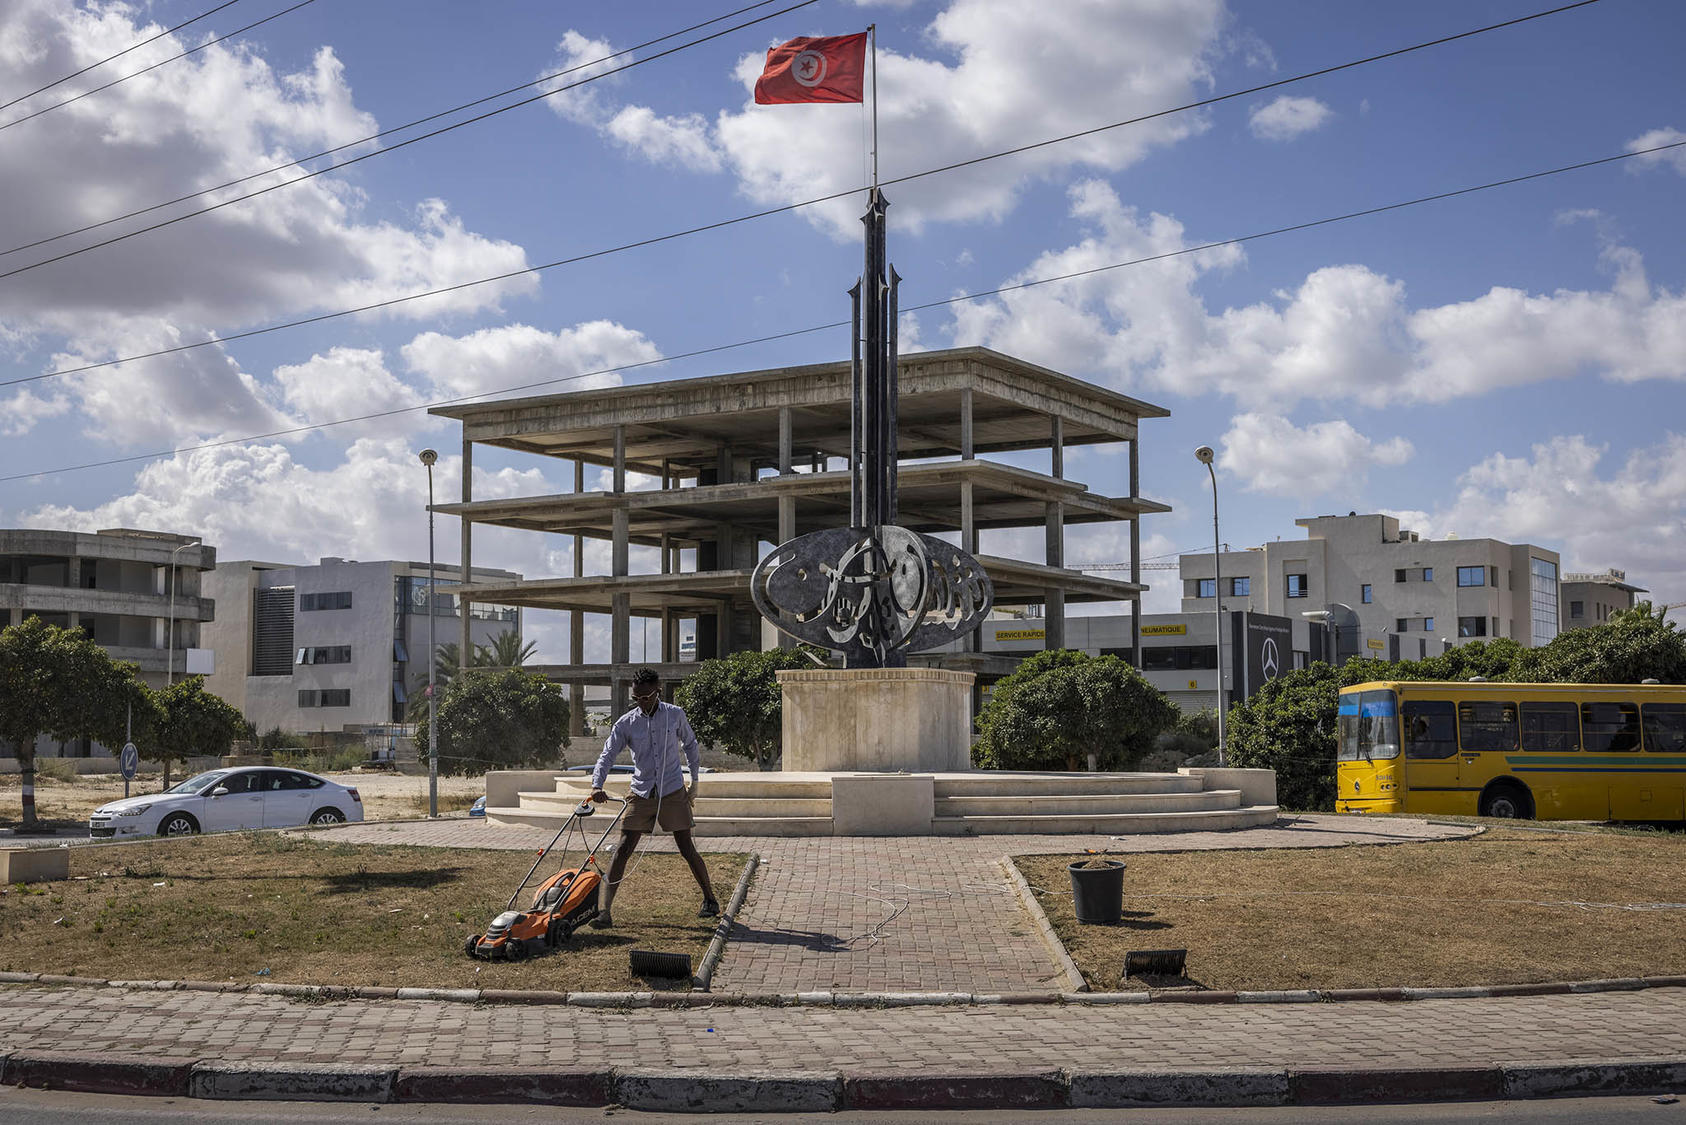 A memorial dedicated to Tunisia’s 2011 revolution. A nationwide strike by public-sector workers on June 16, 2022, threatened to deepen Tunisia’s crises and challenge President Saied’s campaign to consolidate power. (Ivor Prickett/The New York Times)